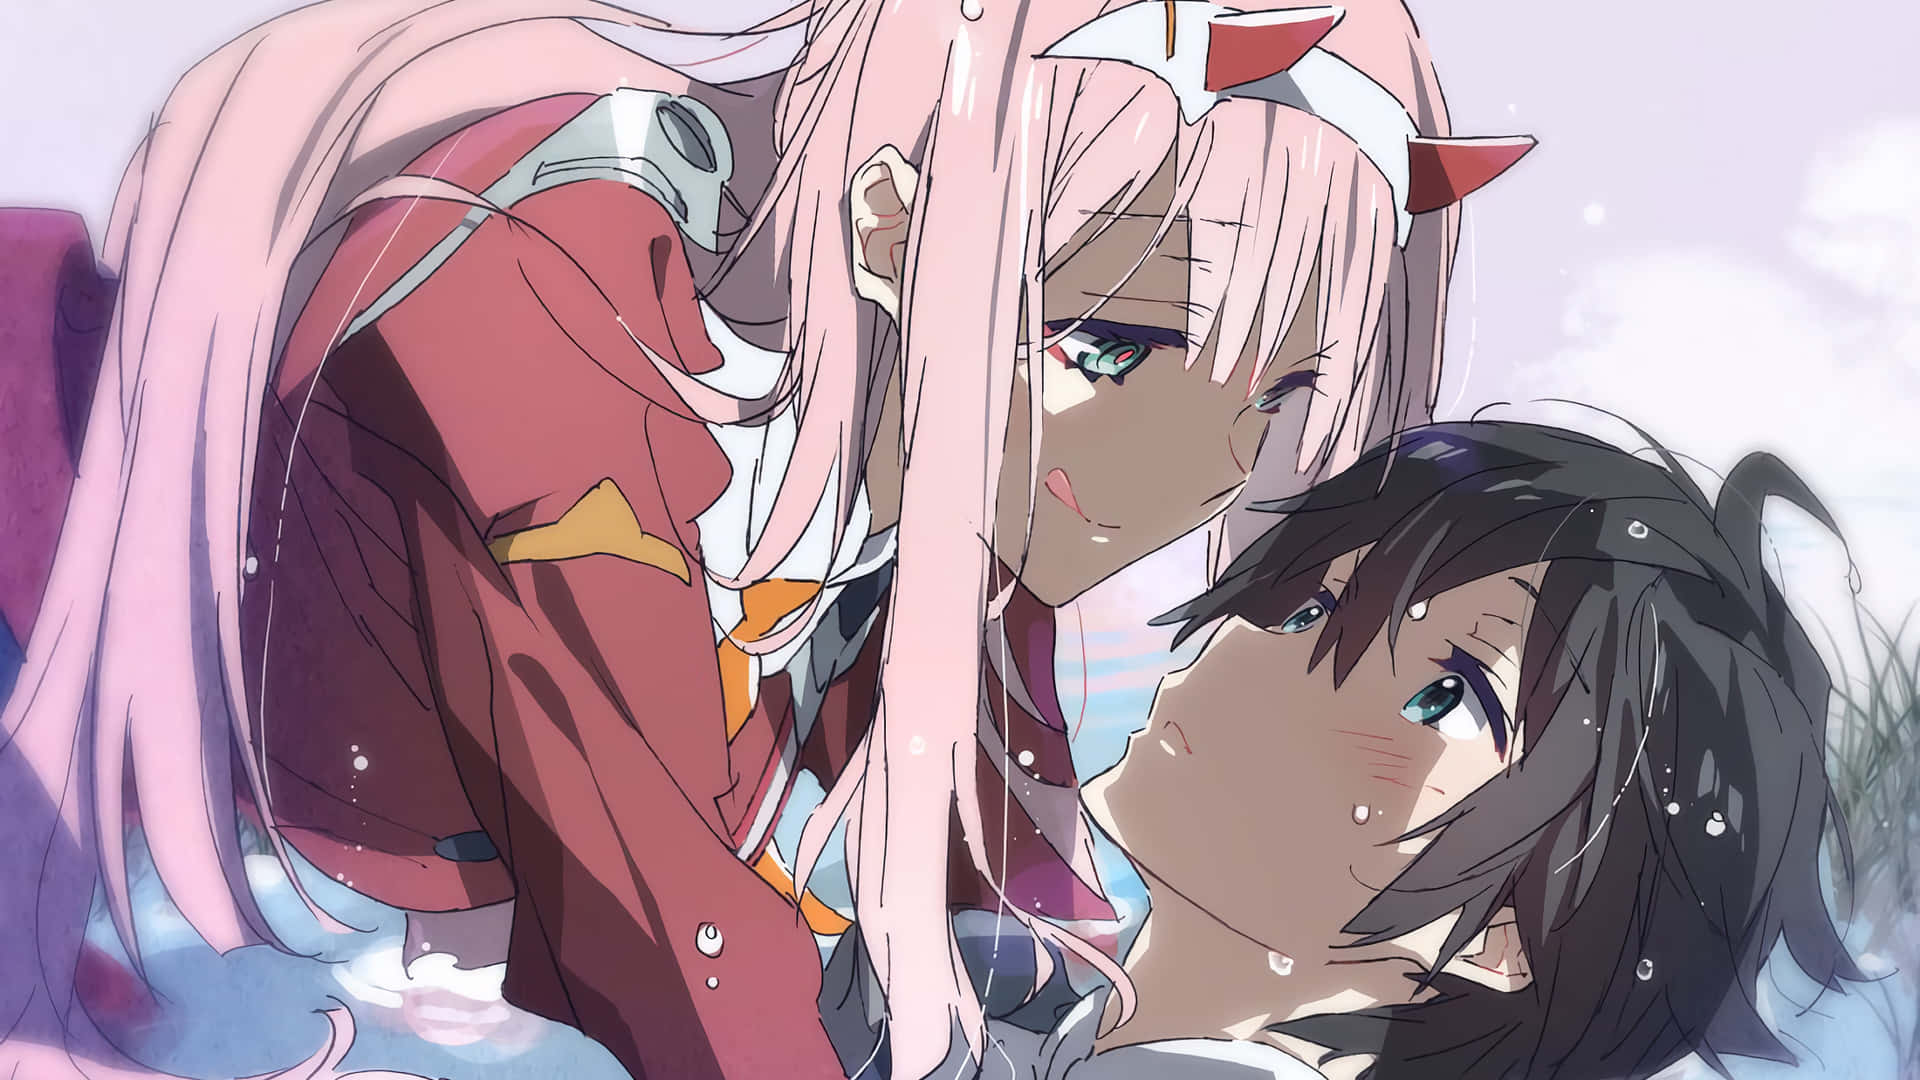 "Living life on the edge with Zero Two"